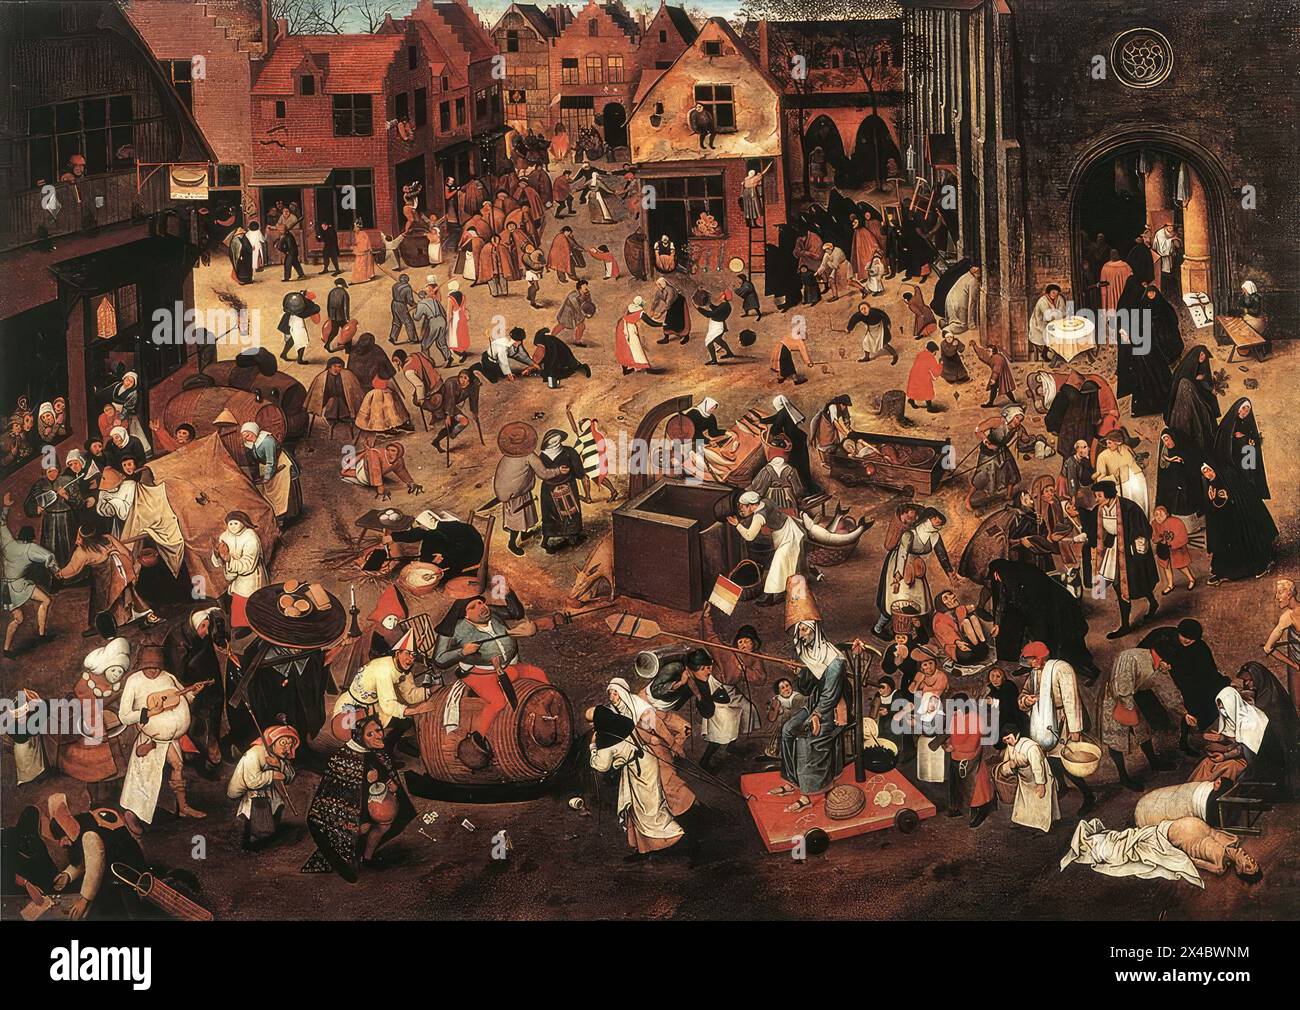 BRUEGHEL, Pieter the Younger (b. 1564, Bruxelles, d. 1638, Antwerp)  Battle of Carnival and Lent - Oil on wood, 121,3 x 171,5 cm Musées Royaux des Beaux-Arts, Brussels  If Pieter Bruegel the Elder enjoyed a solid reputation during his lifetime, his paintings were 'even more sought after following his death' (in 1569), as Provost Morillon wrote to Cardinal de Granvelle as early as 1572. It is probably this constant demand which led the famous painter's oldest son, registered as a master in the Antwerp guild in 1584/85, to specialise in copying his father's works. The Battle of Carnival and Lent Stock Photo